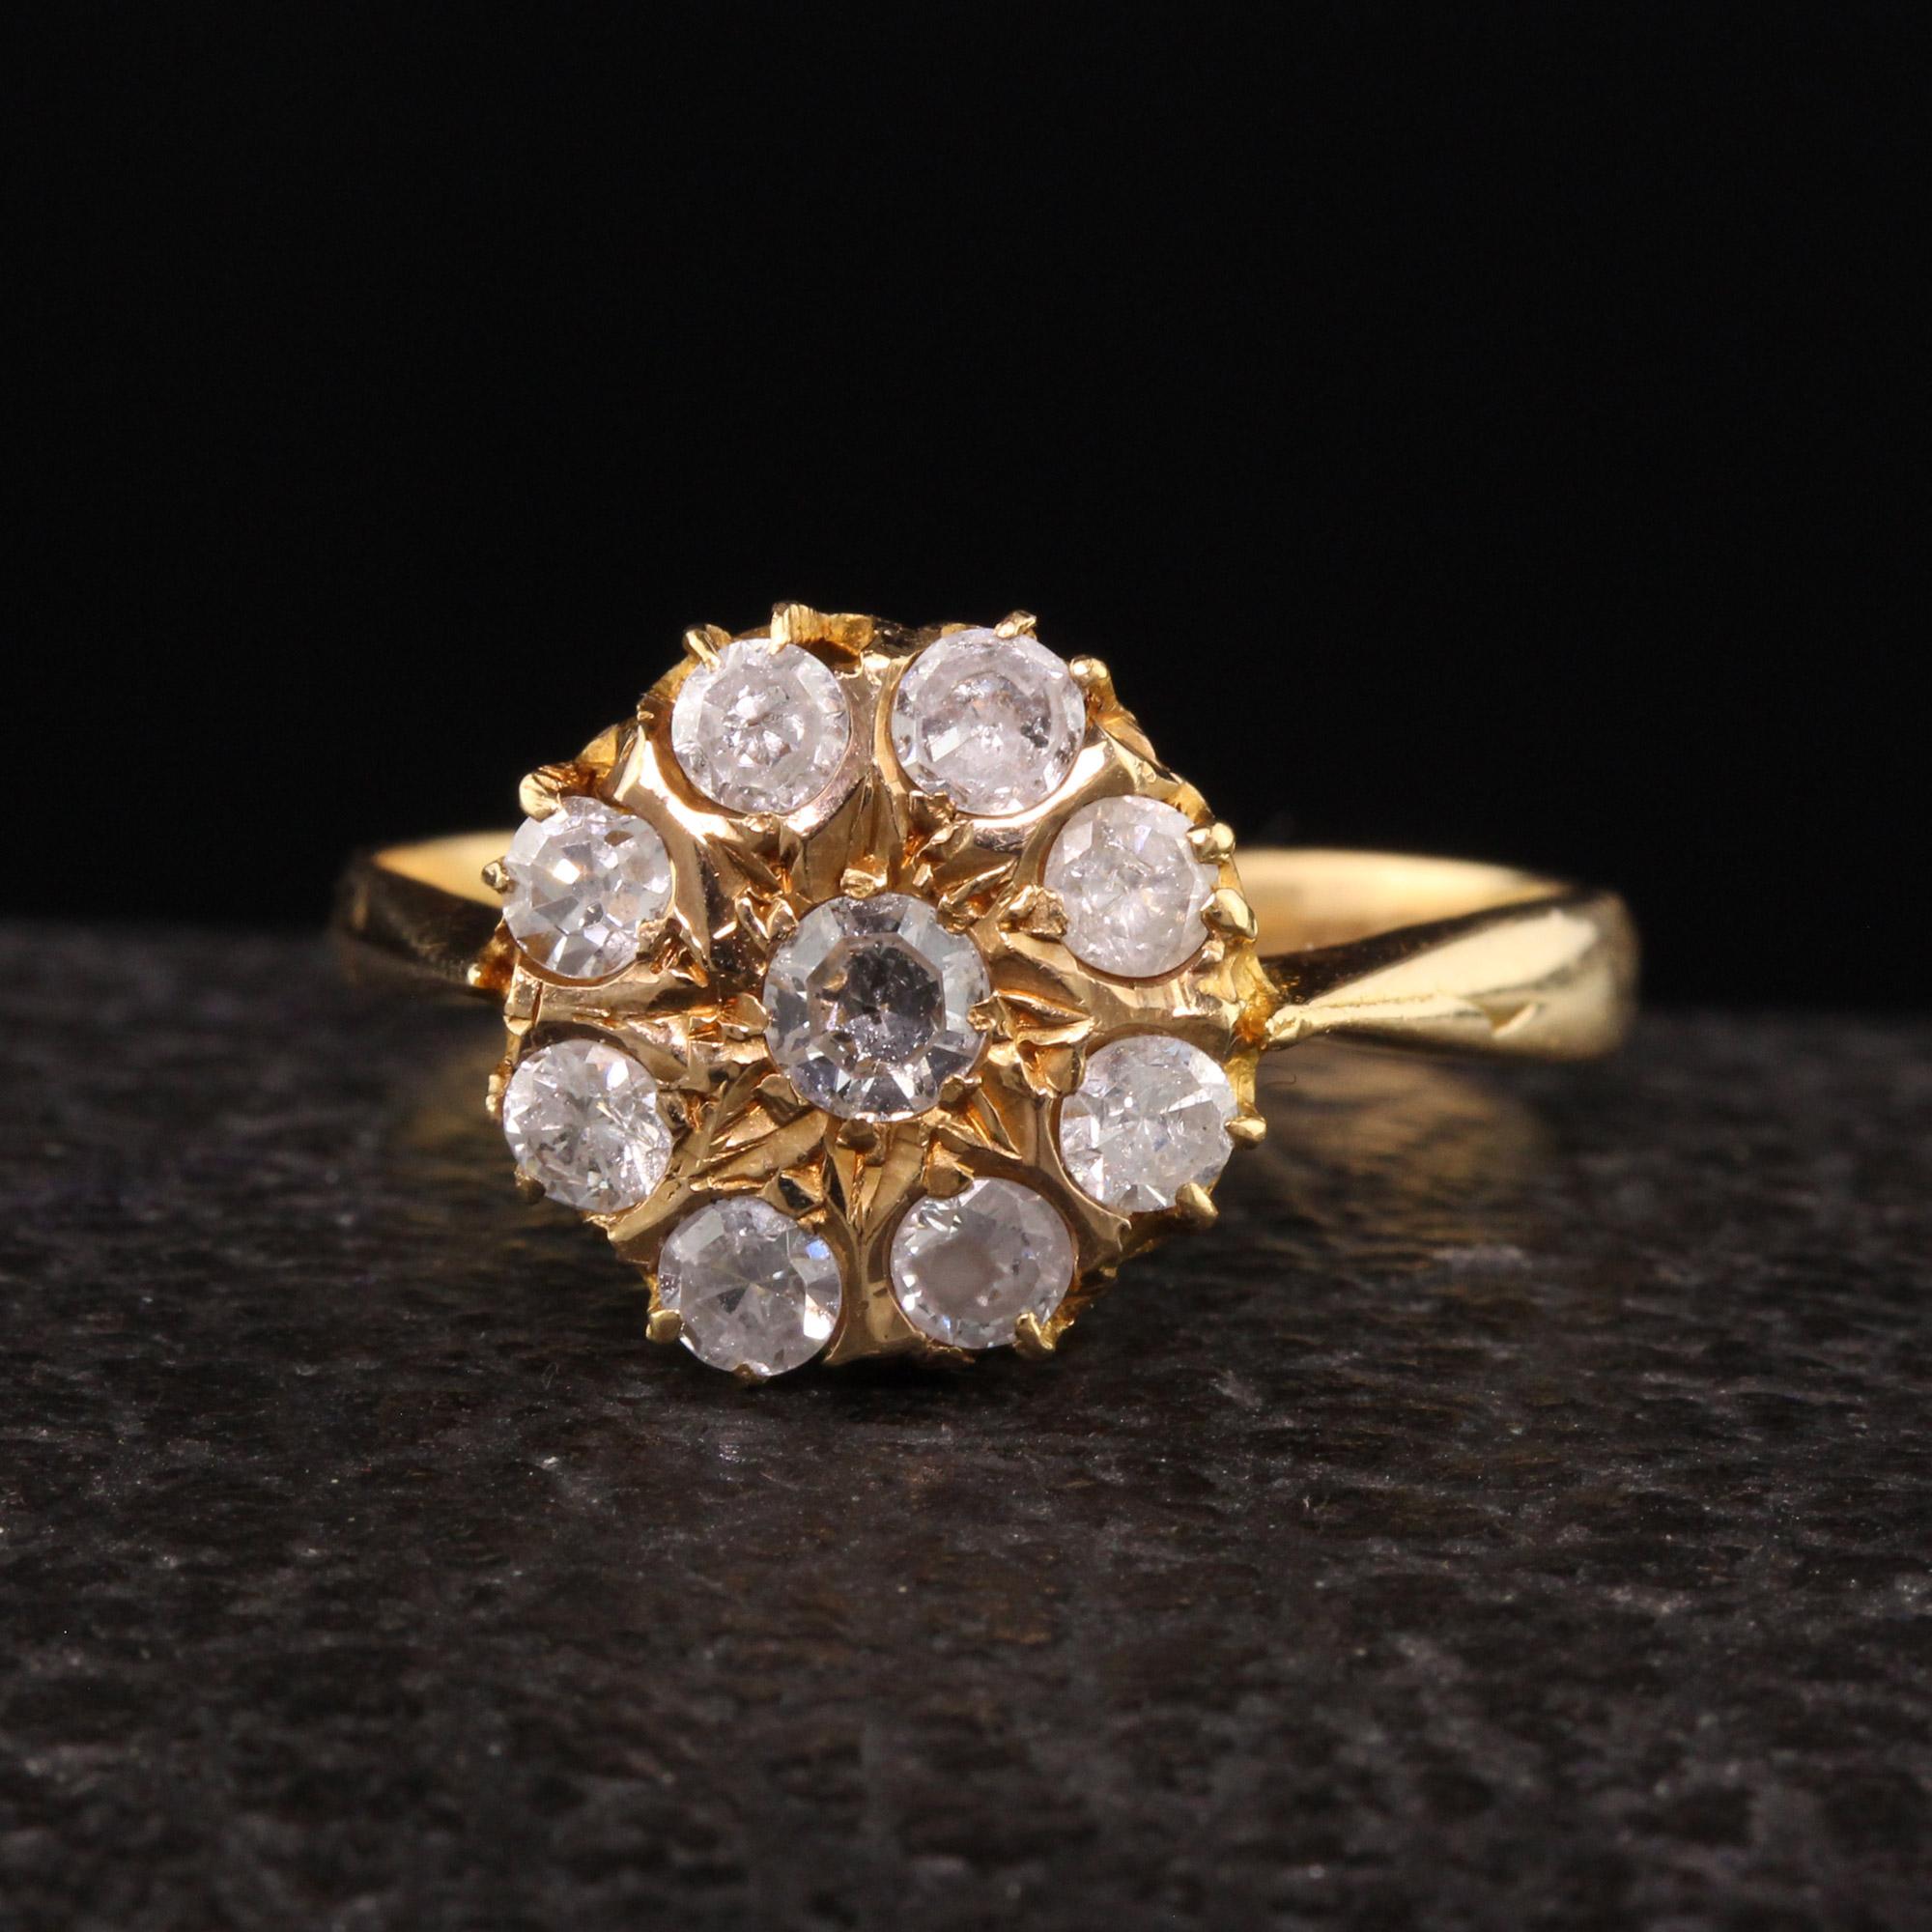 Beautiful Antique Victorian 22K Yellow Gold Single Cut Diamond Cluster Ring. This beautiful cluster ring has single cut diamonds on the top of an art deco mounting that is crafted in 22k yellow gold.

Item #R1093

Metal: 22K Yellow Gold

Weight: 3